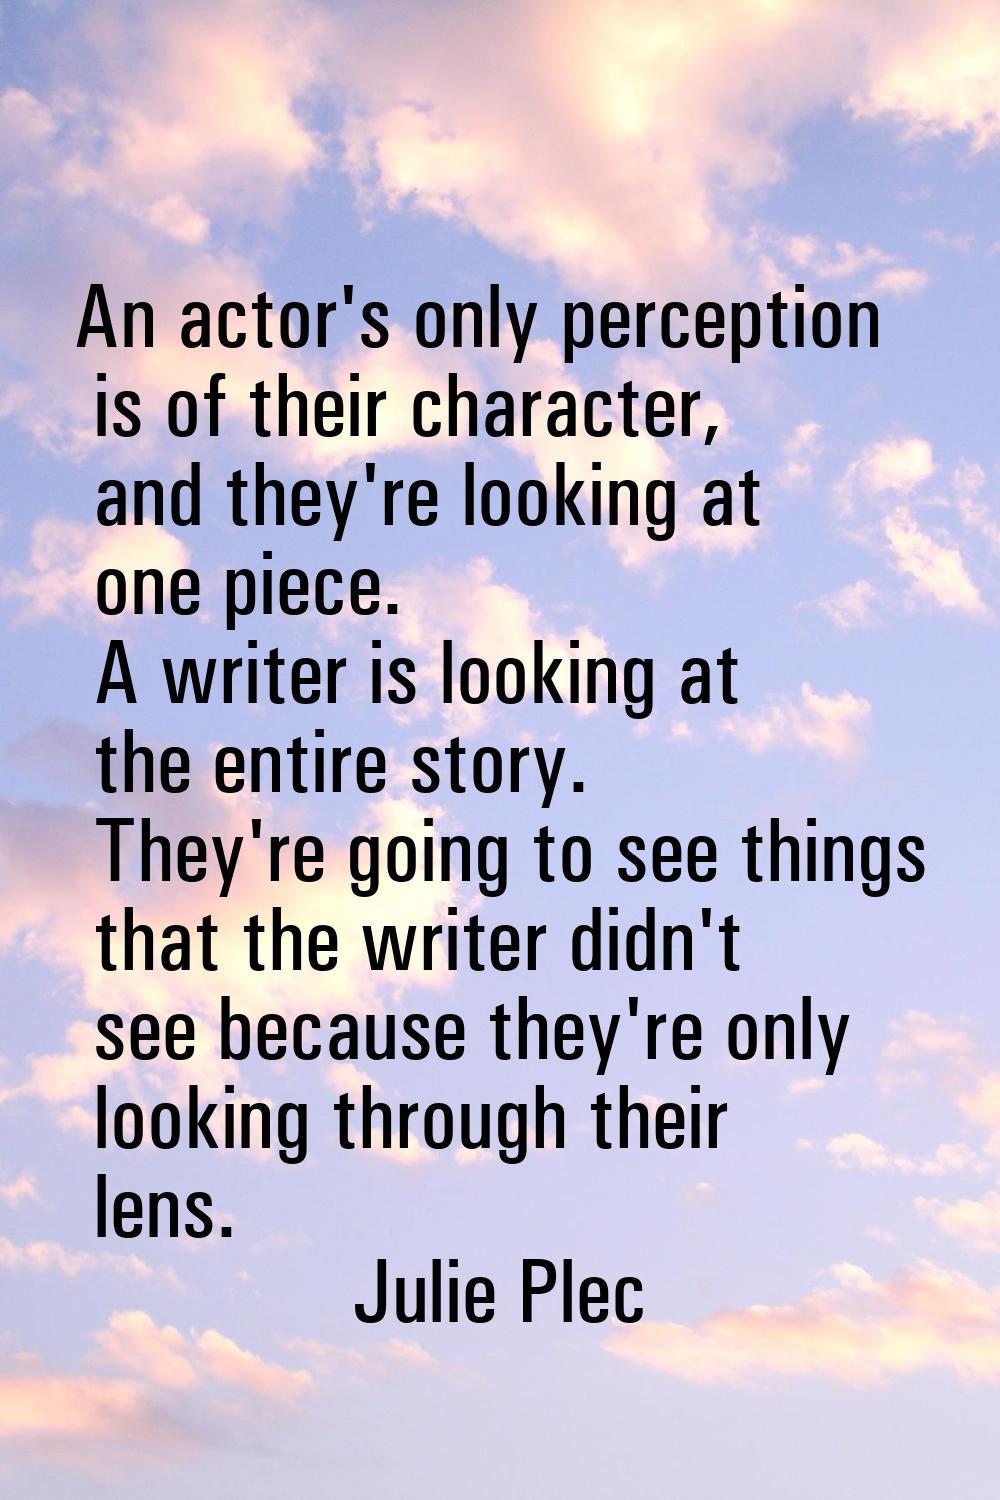 An actor's only perception is of their character, and they're looking at one piece. A writer is loo